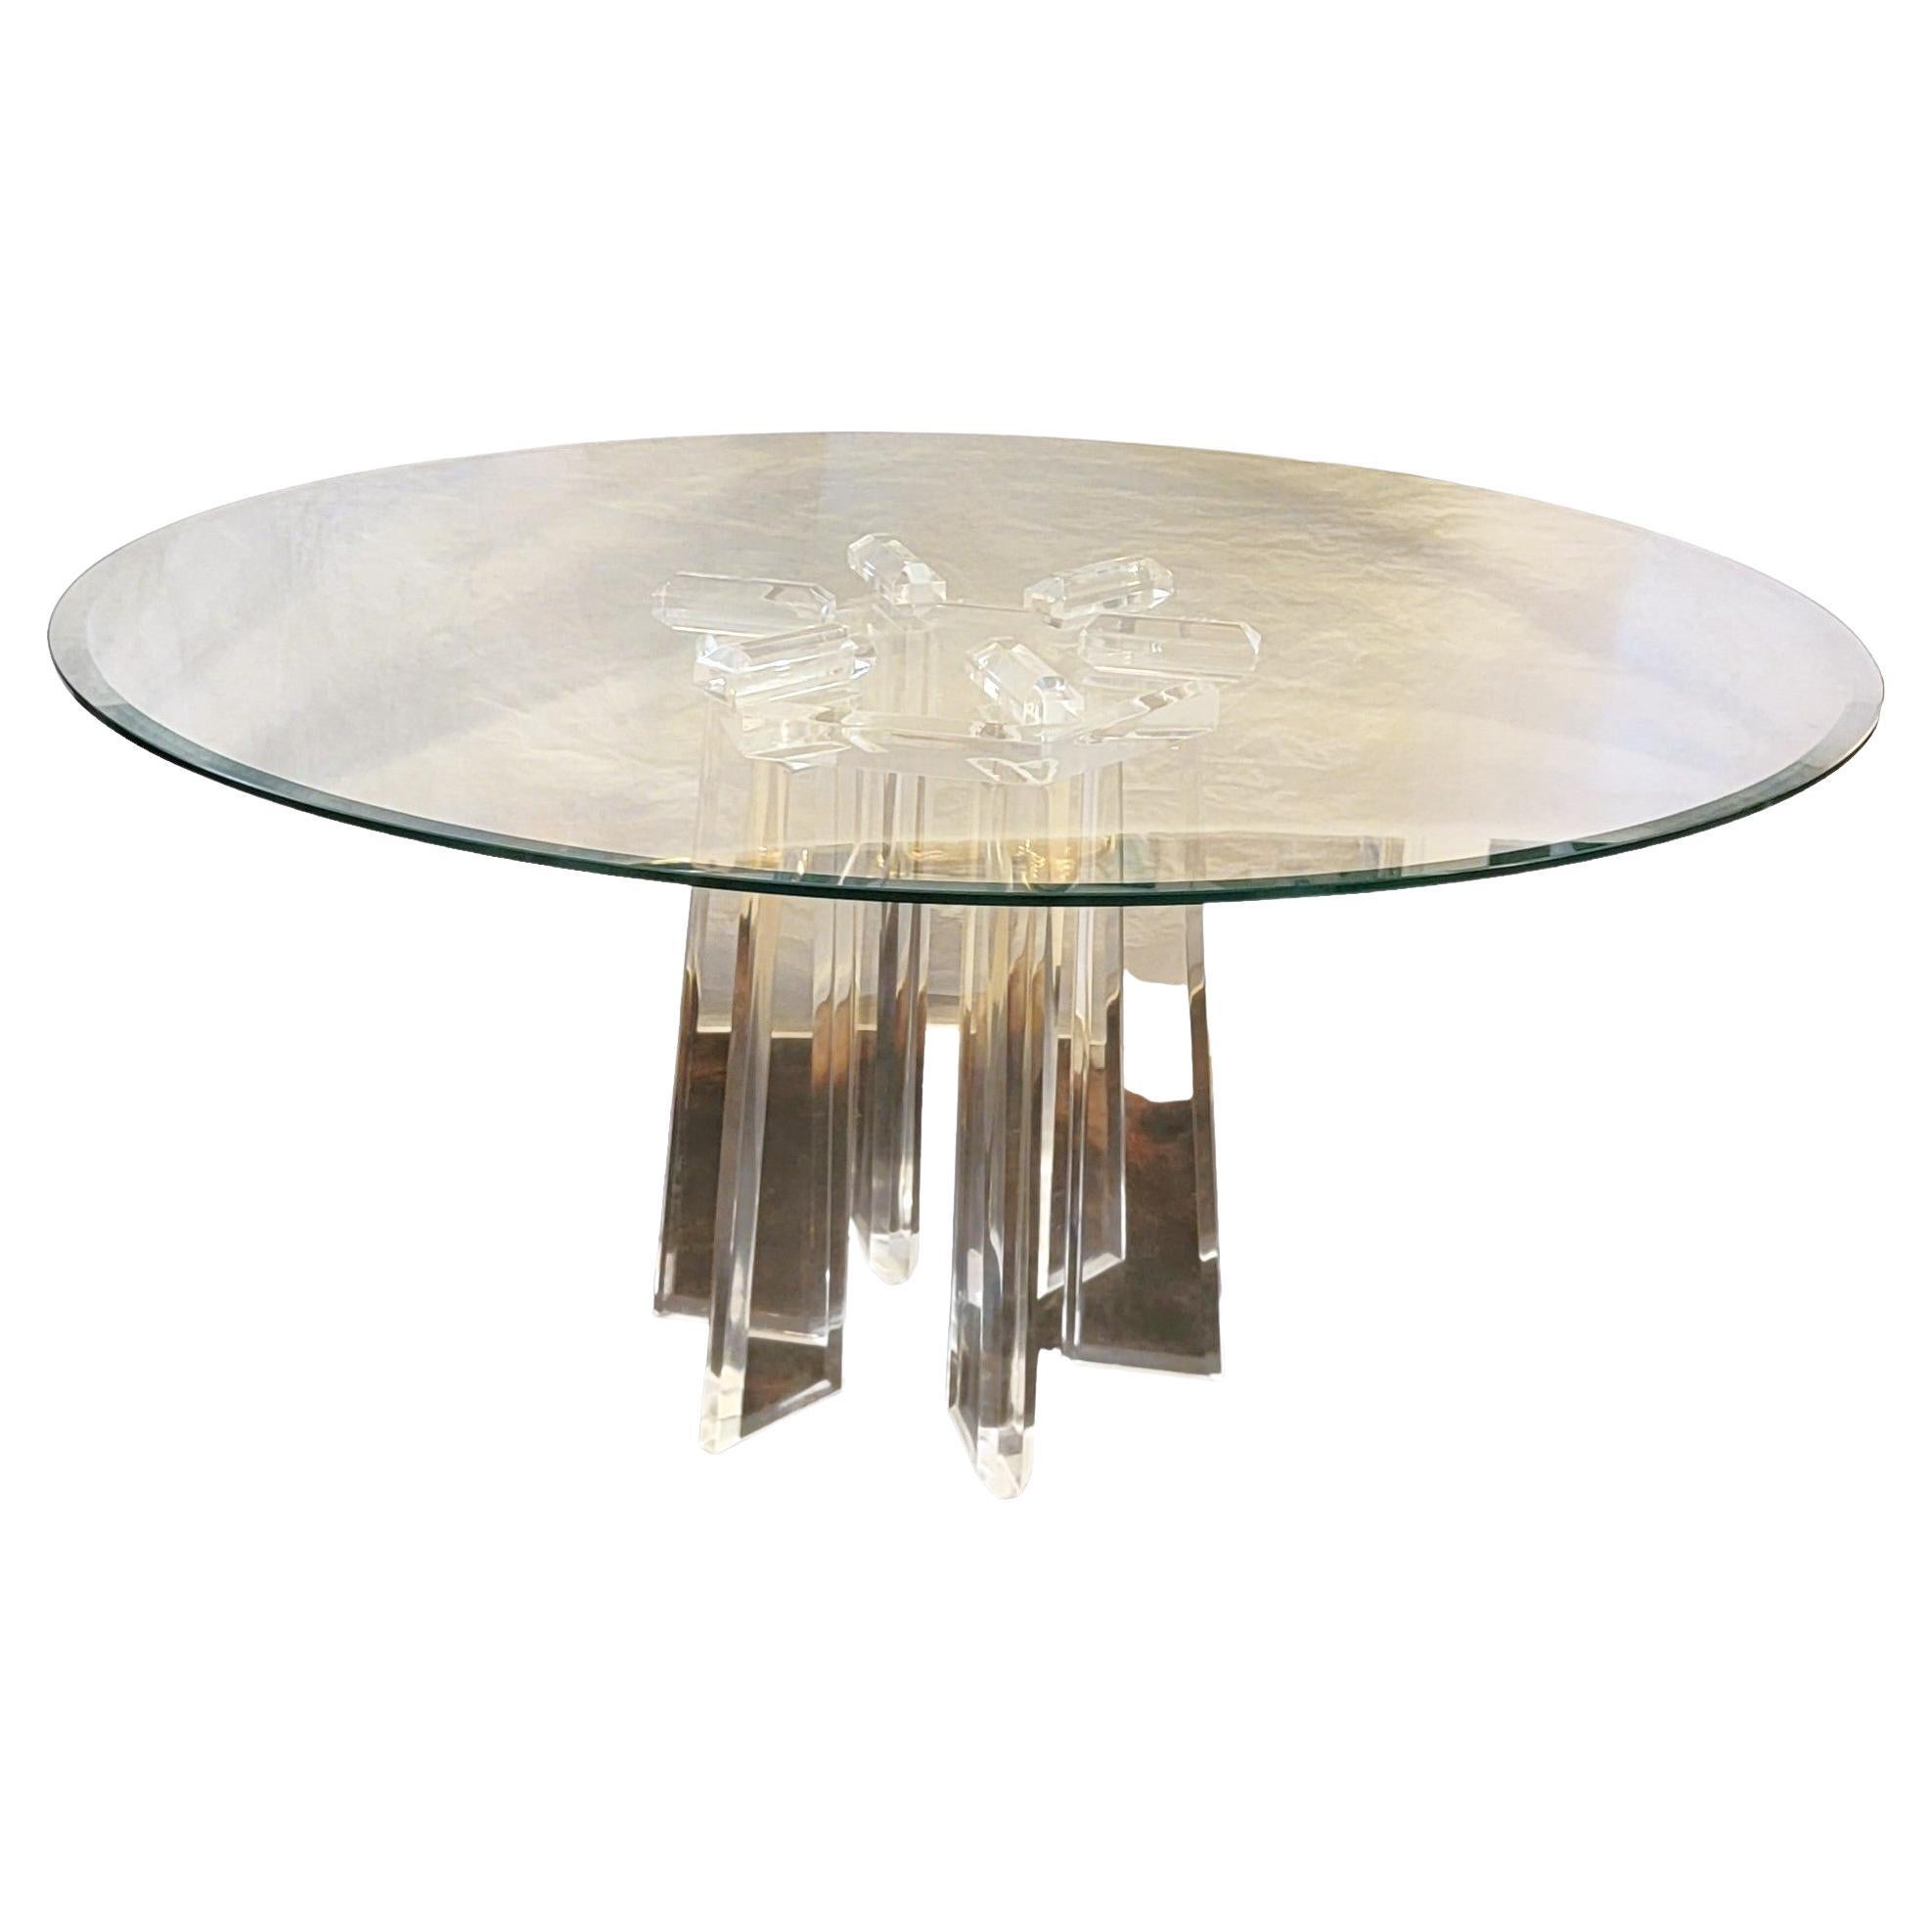 1970s Midcentury Glass and Lucite Pedestal Table For Sale